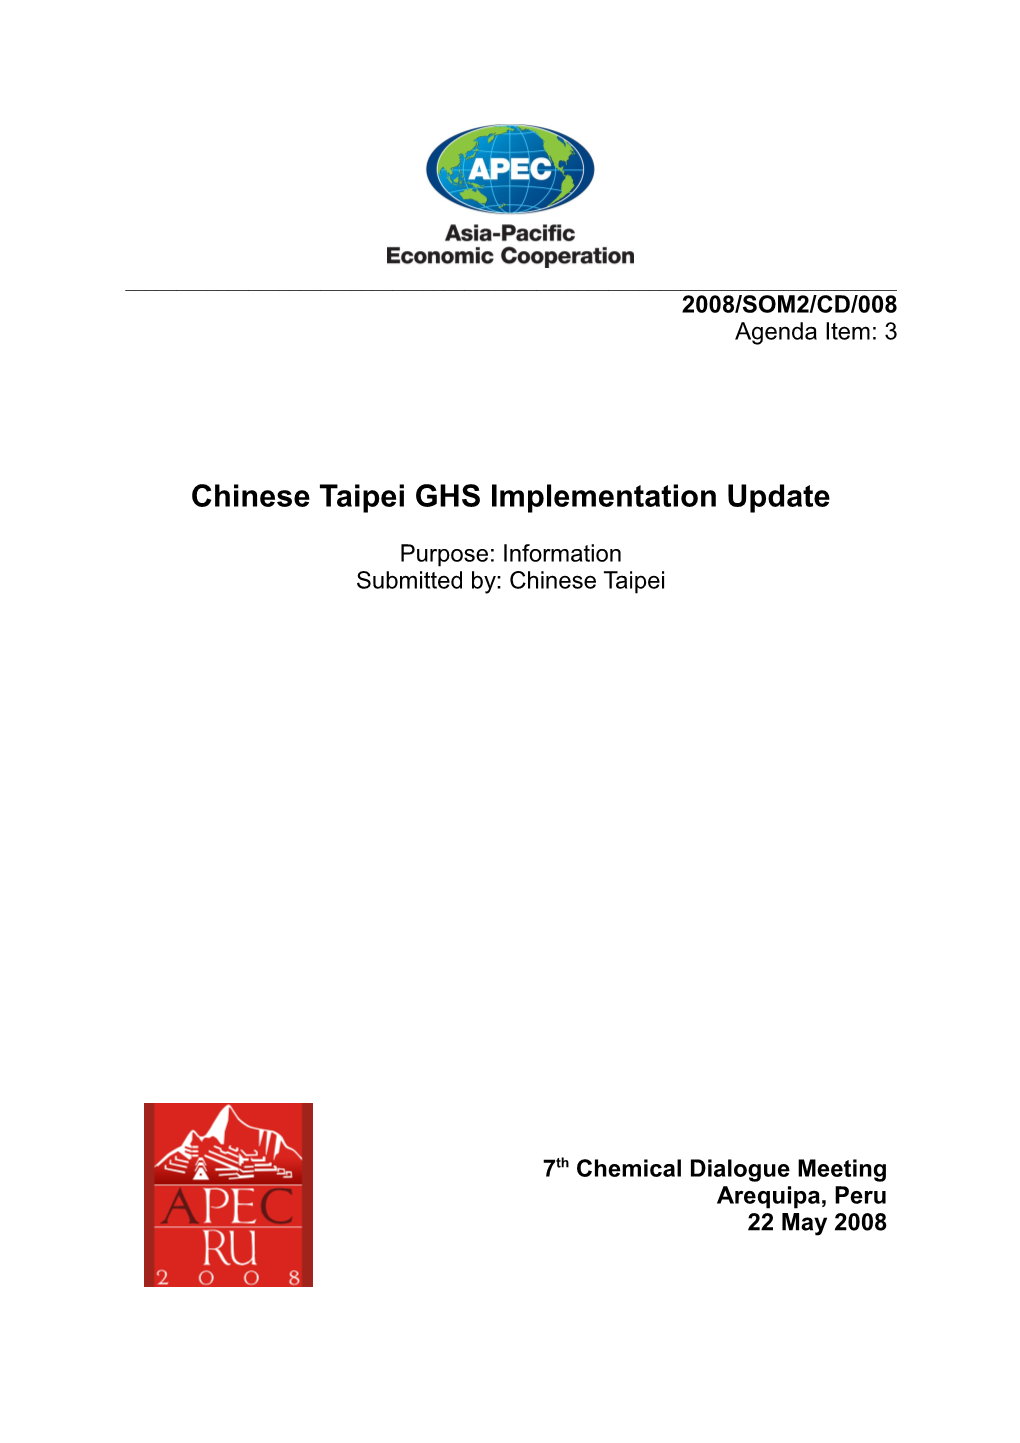 Chinese Taipei - Ghs Implementation Update and Position Paper